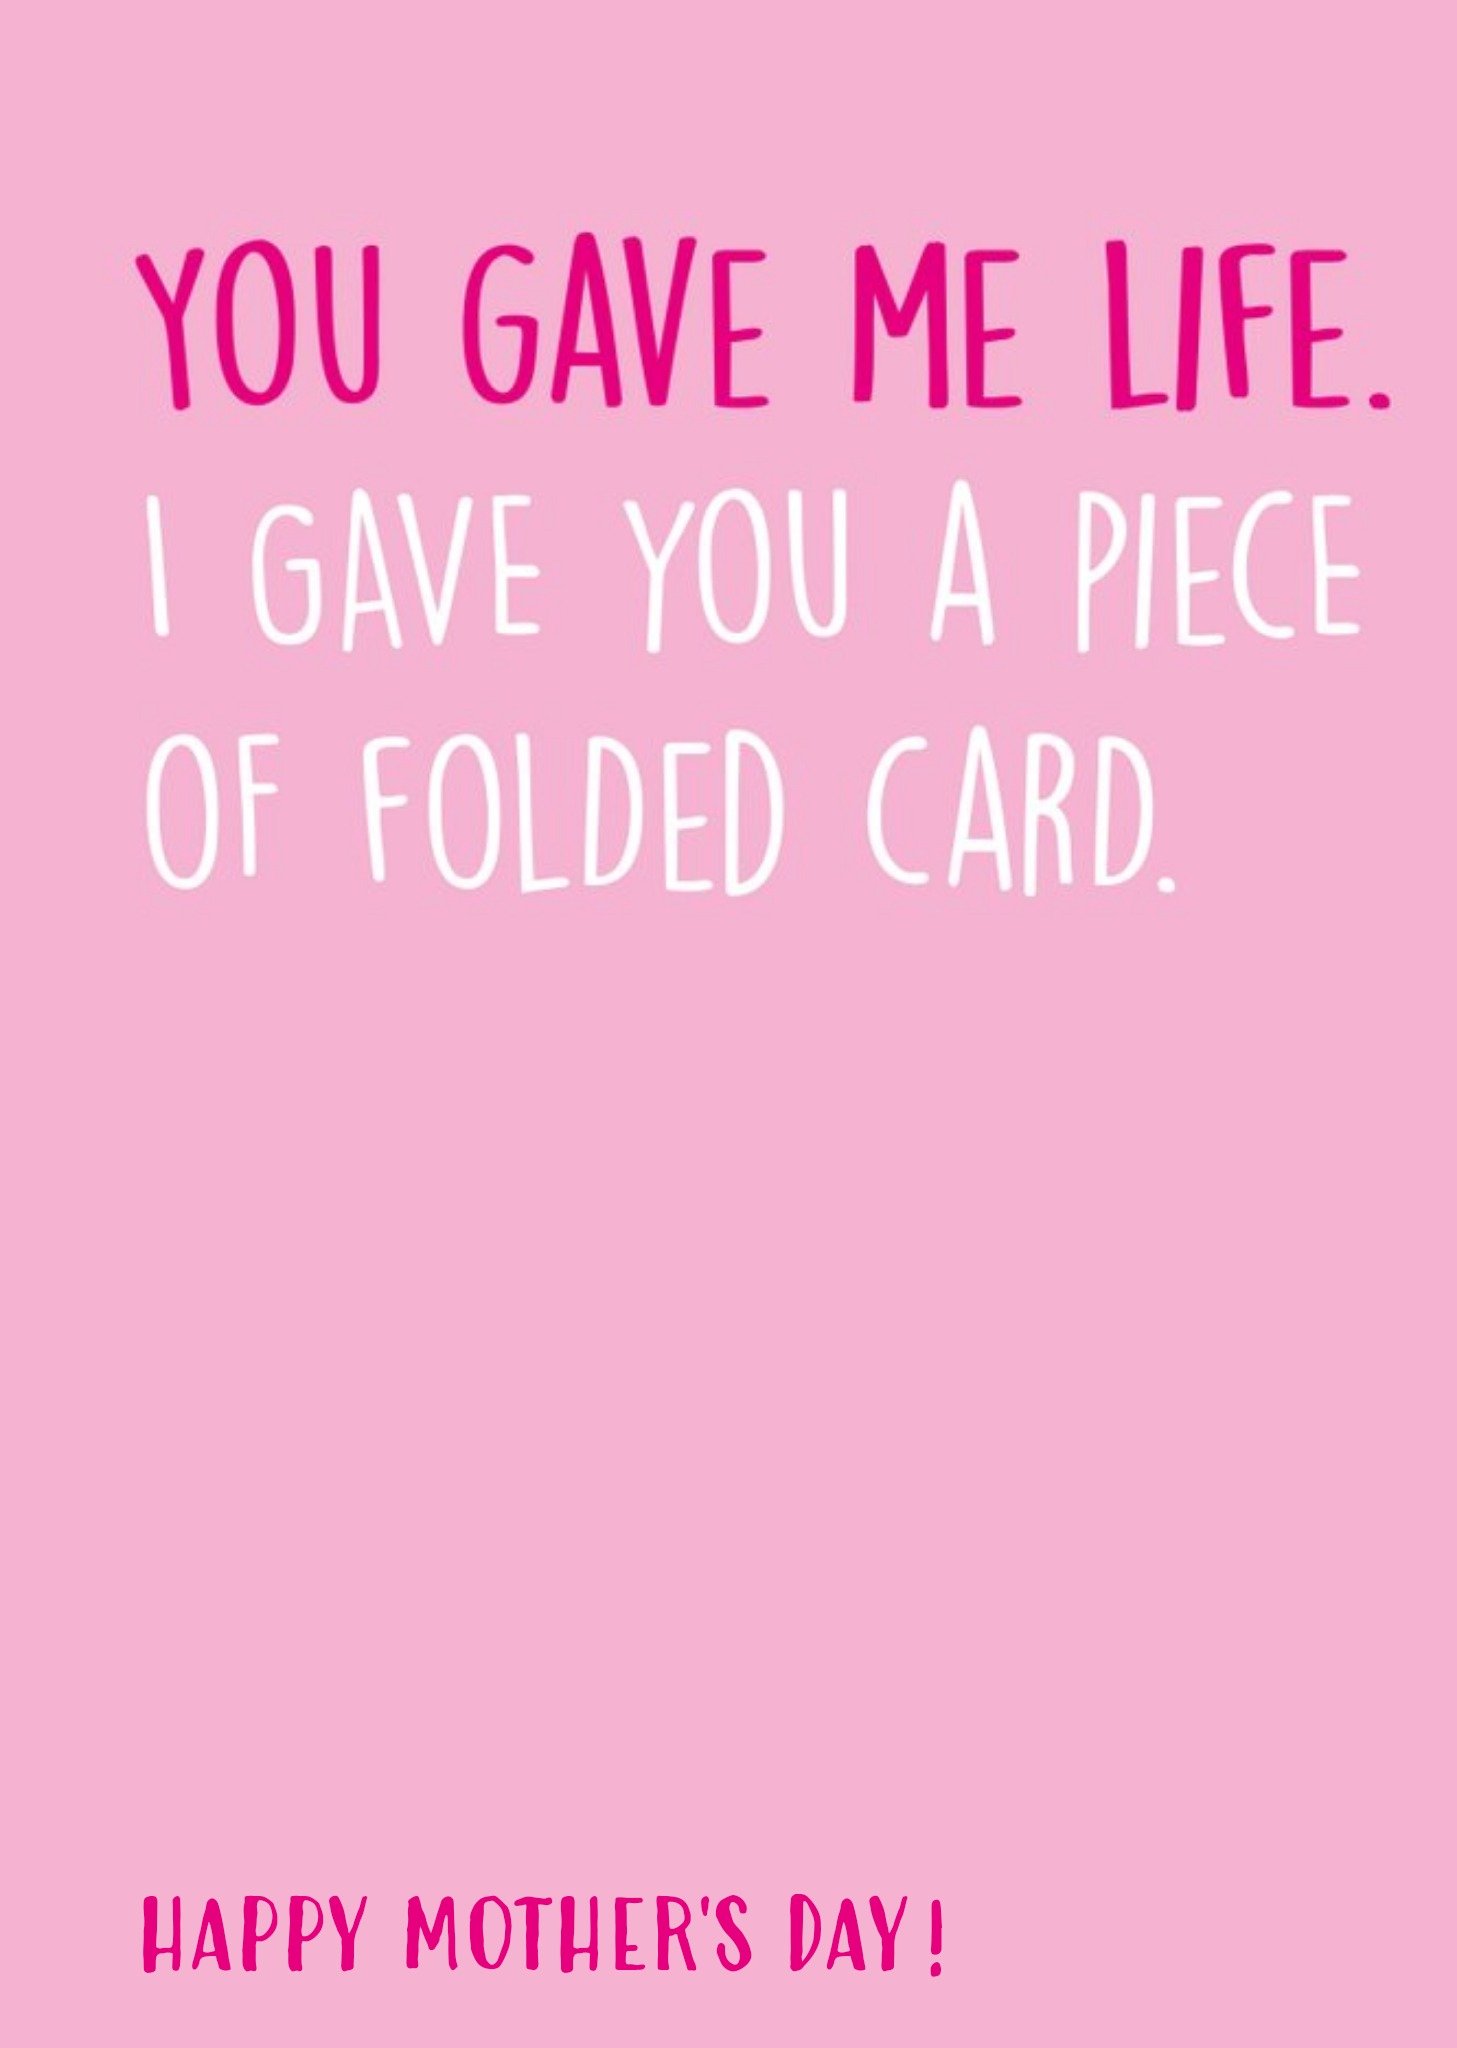 Moonpig Funny Gift Of Life Vs Folded Card Mother's Day Card Ecard